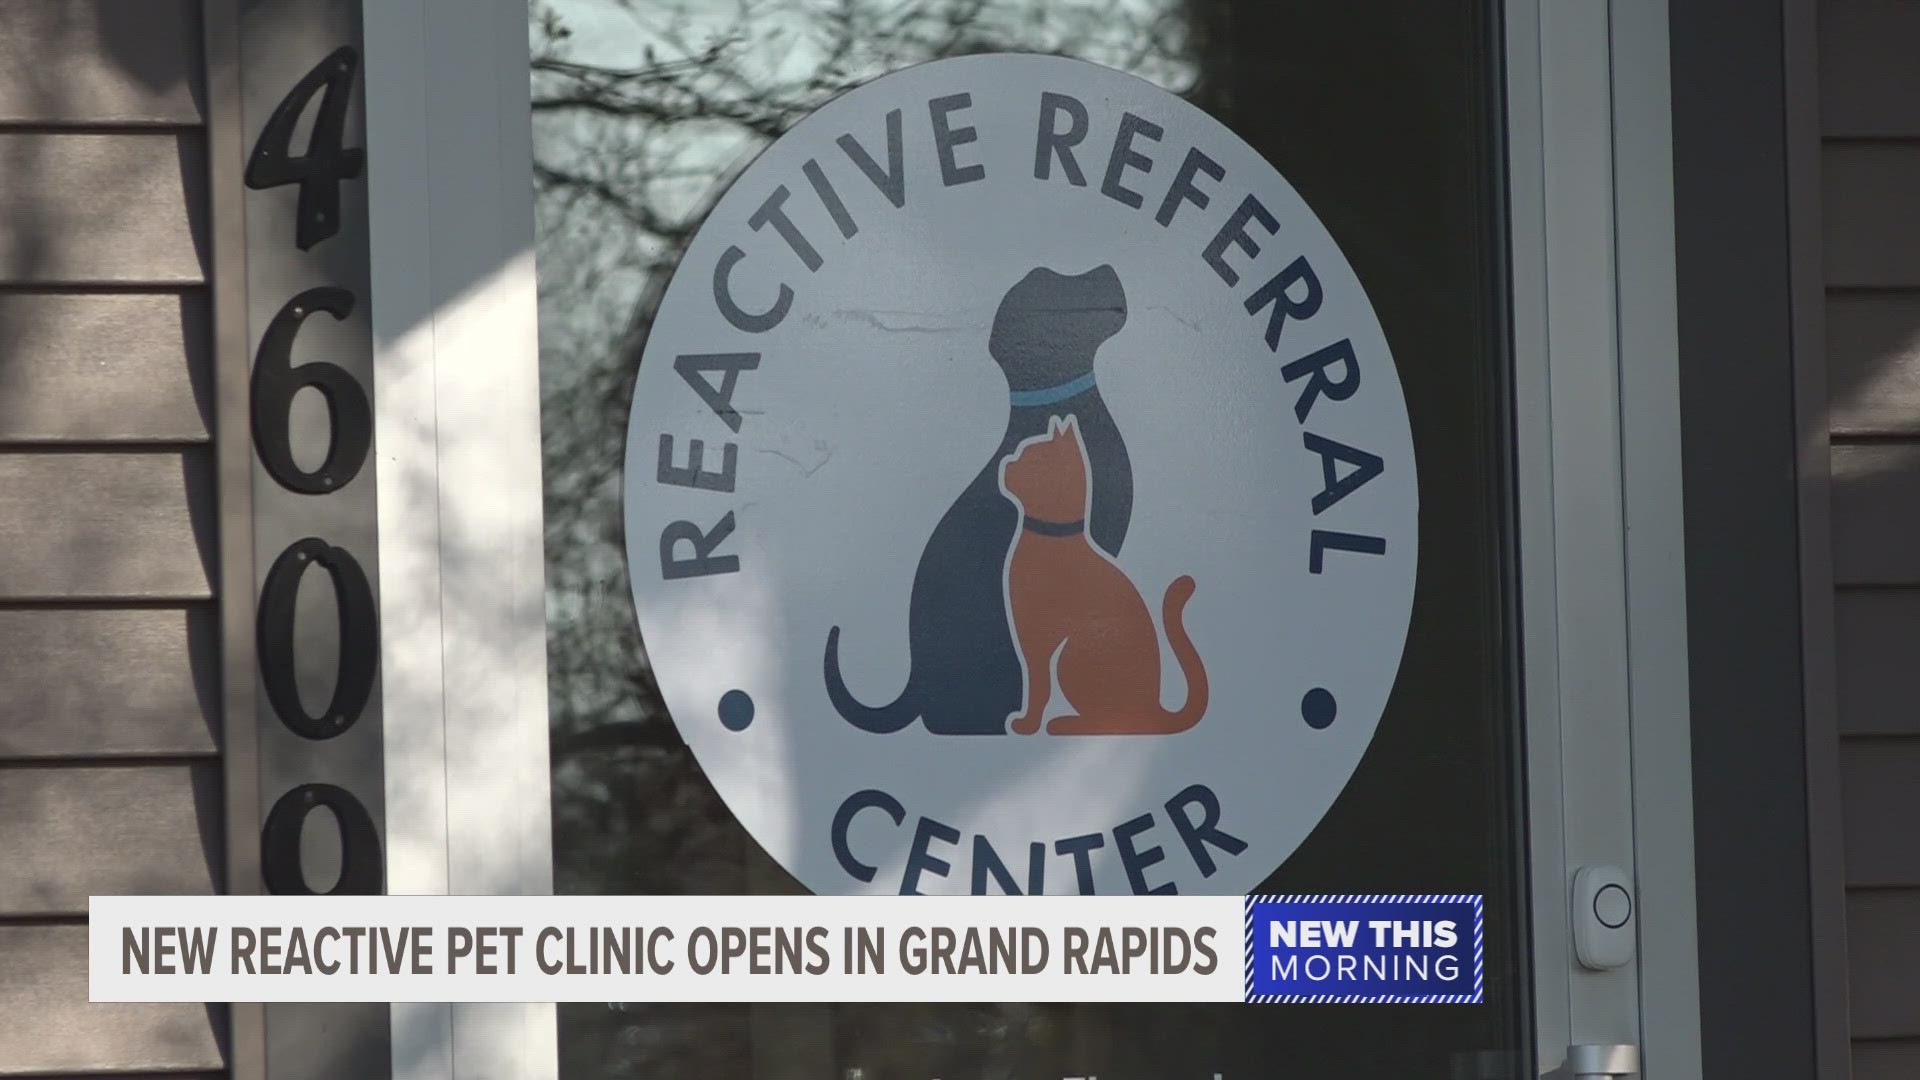 While the clinic specializes in reactivity, you don’t need to have a reactive pet or a referral to come.